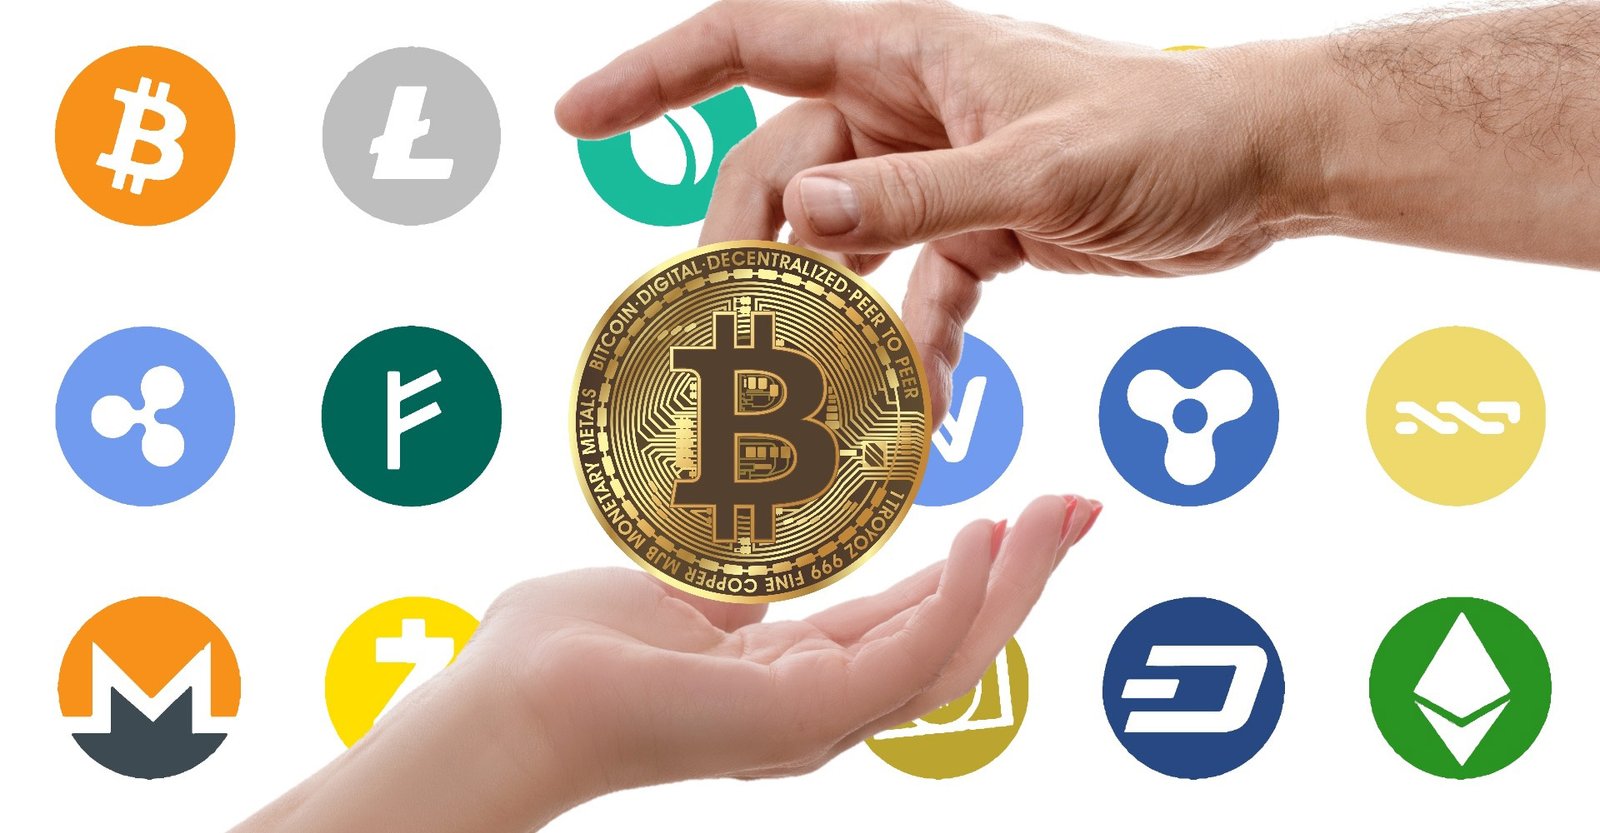 What Is A Cryptocurrency? A Beginner’s Guide to Understanding Cryptocurrencies